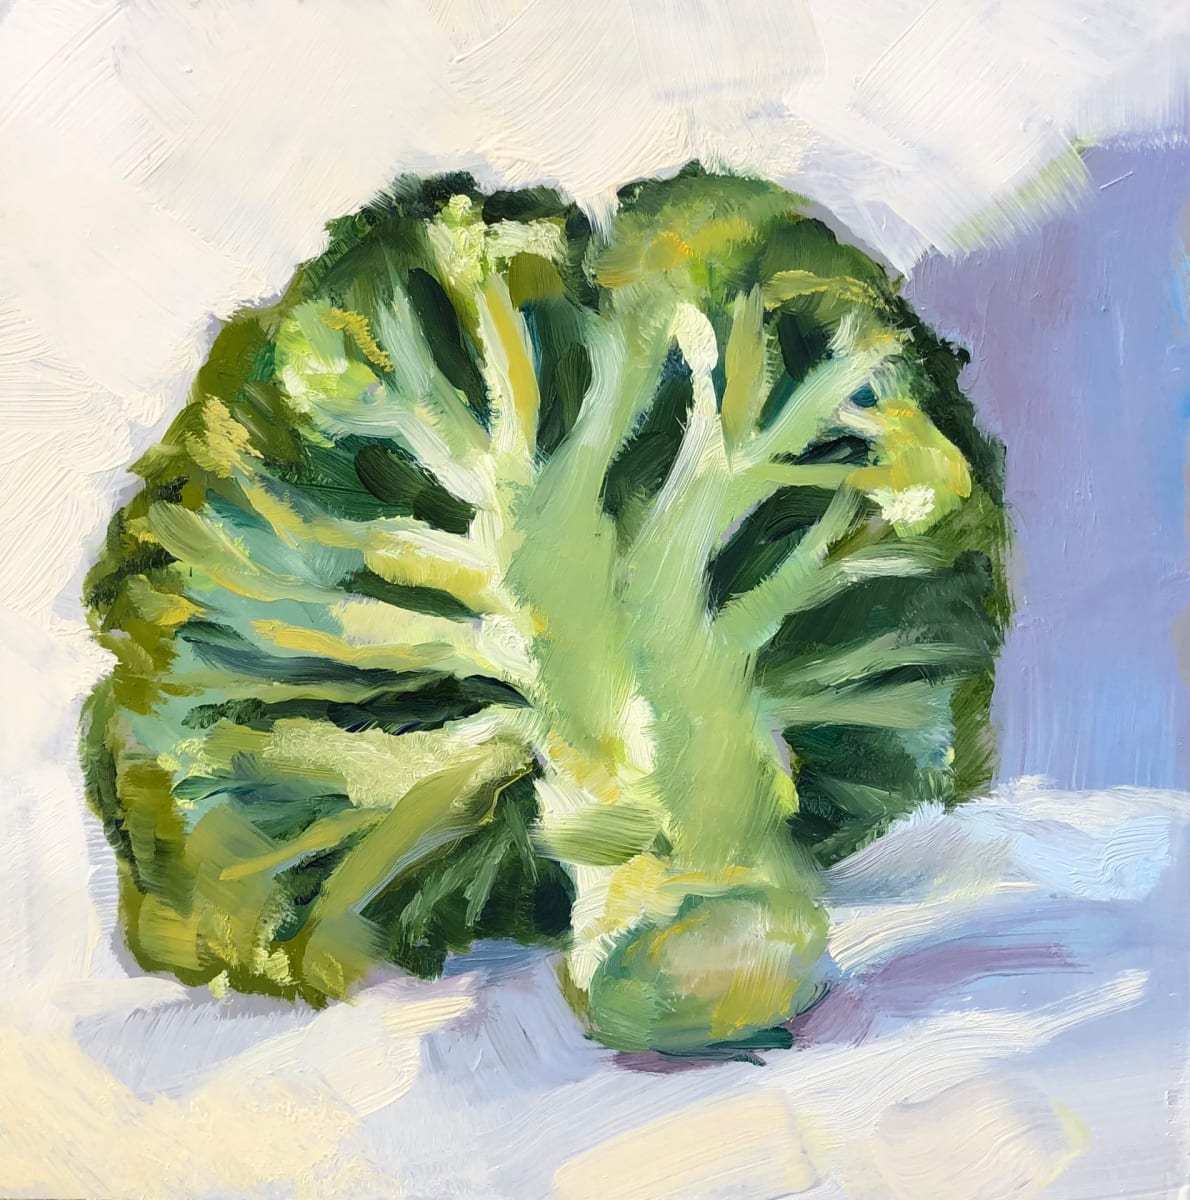 Broccoli by Cary Galbraith  Image: I like to work with cool and warm colors. Green is a cool color but can feel very warm in certain light. And in reality brocolli can be eaten warm or cool. 